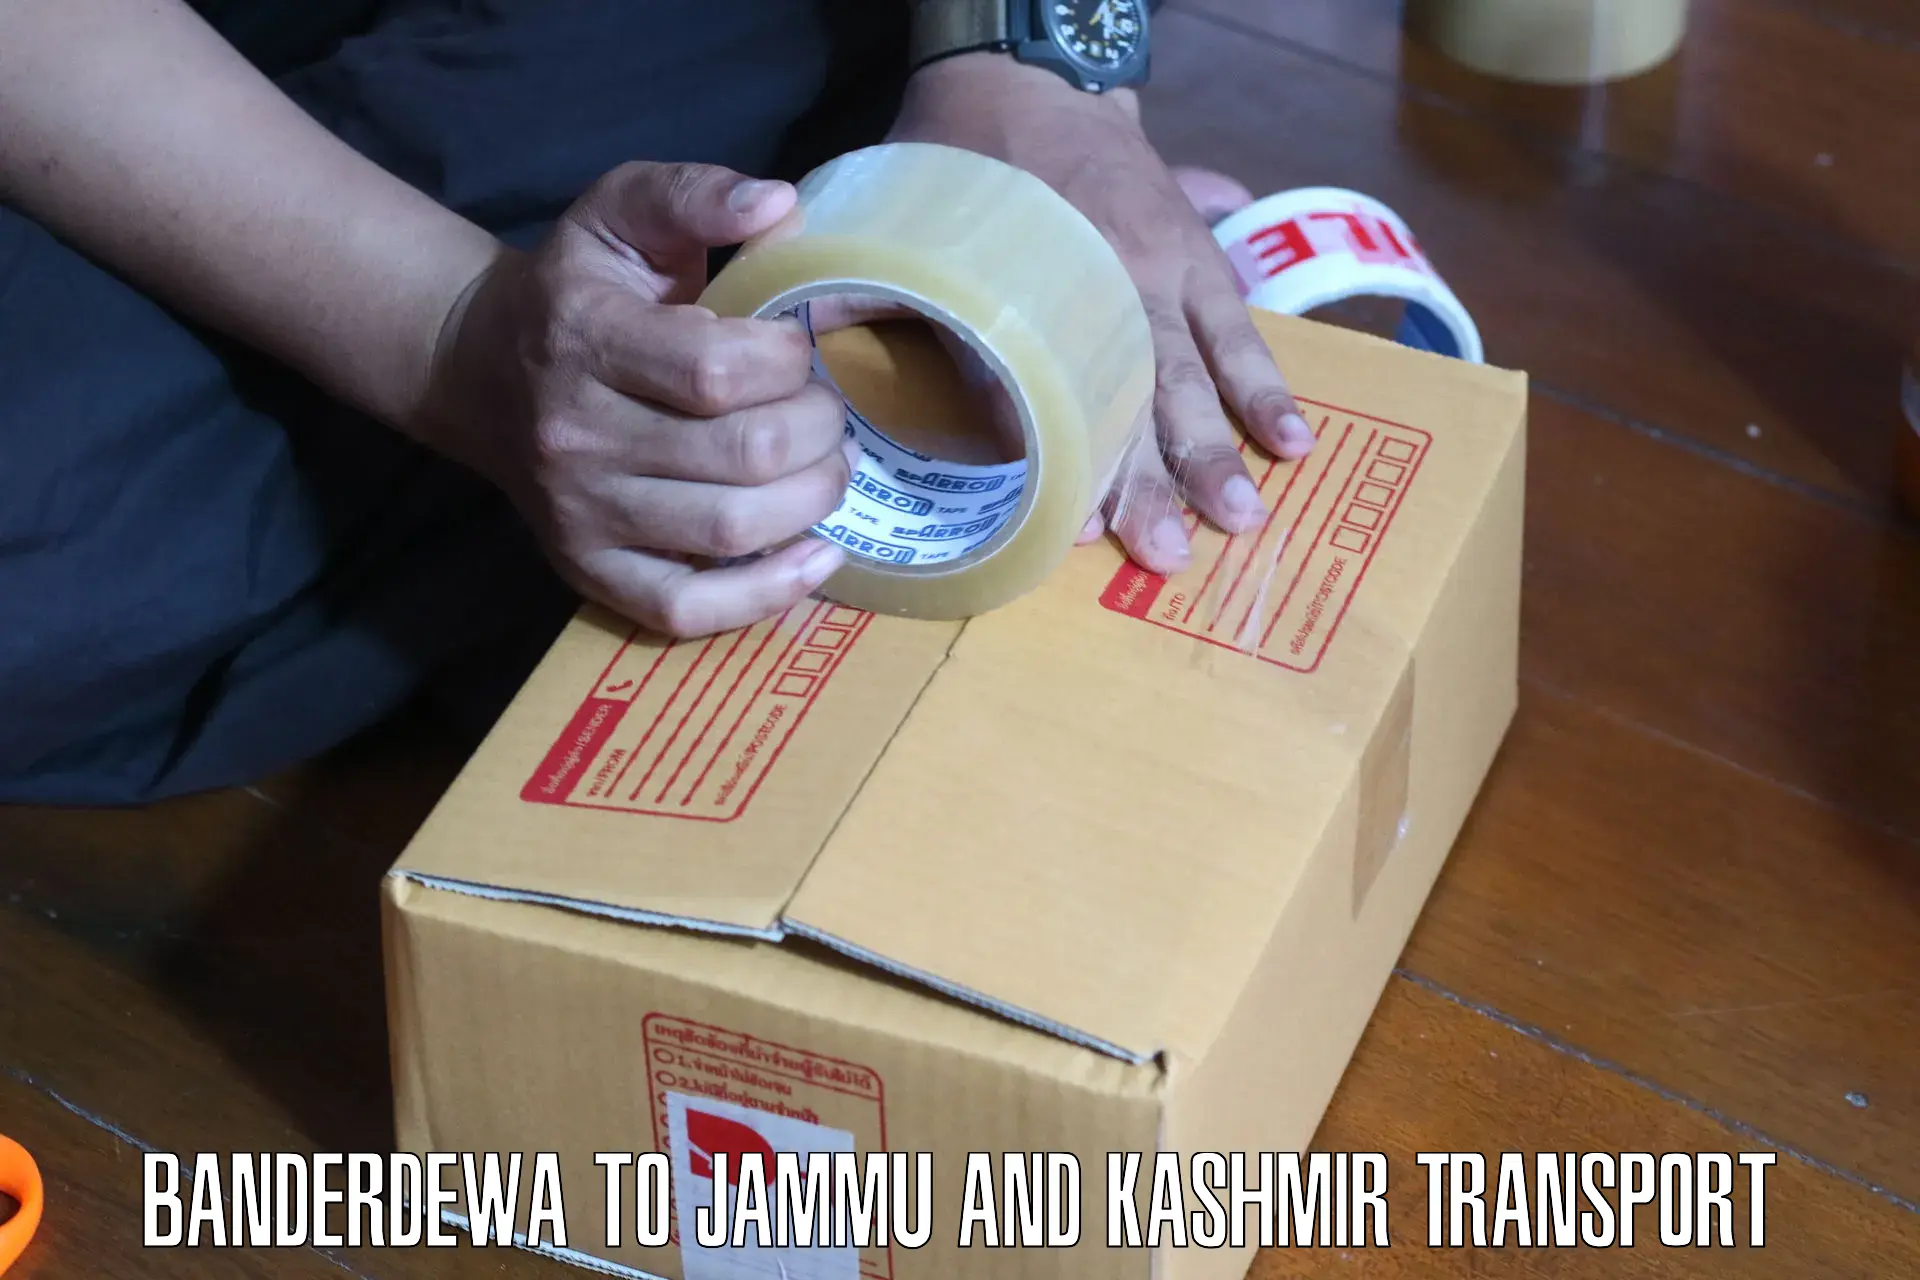 Express transport services in Banderdewa to Baramulla